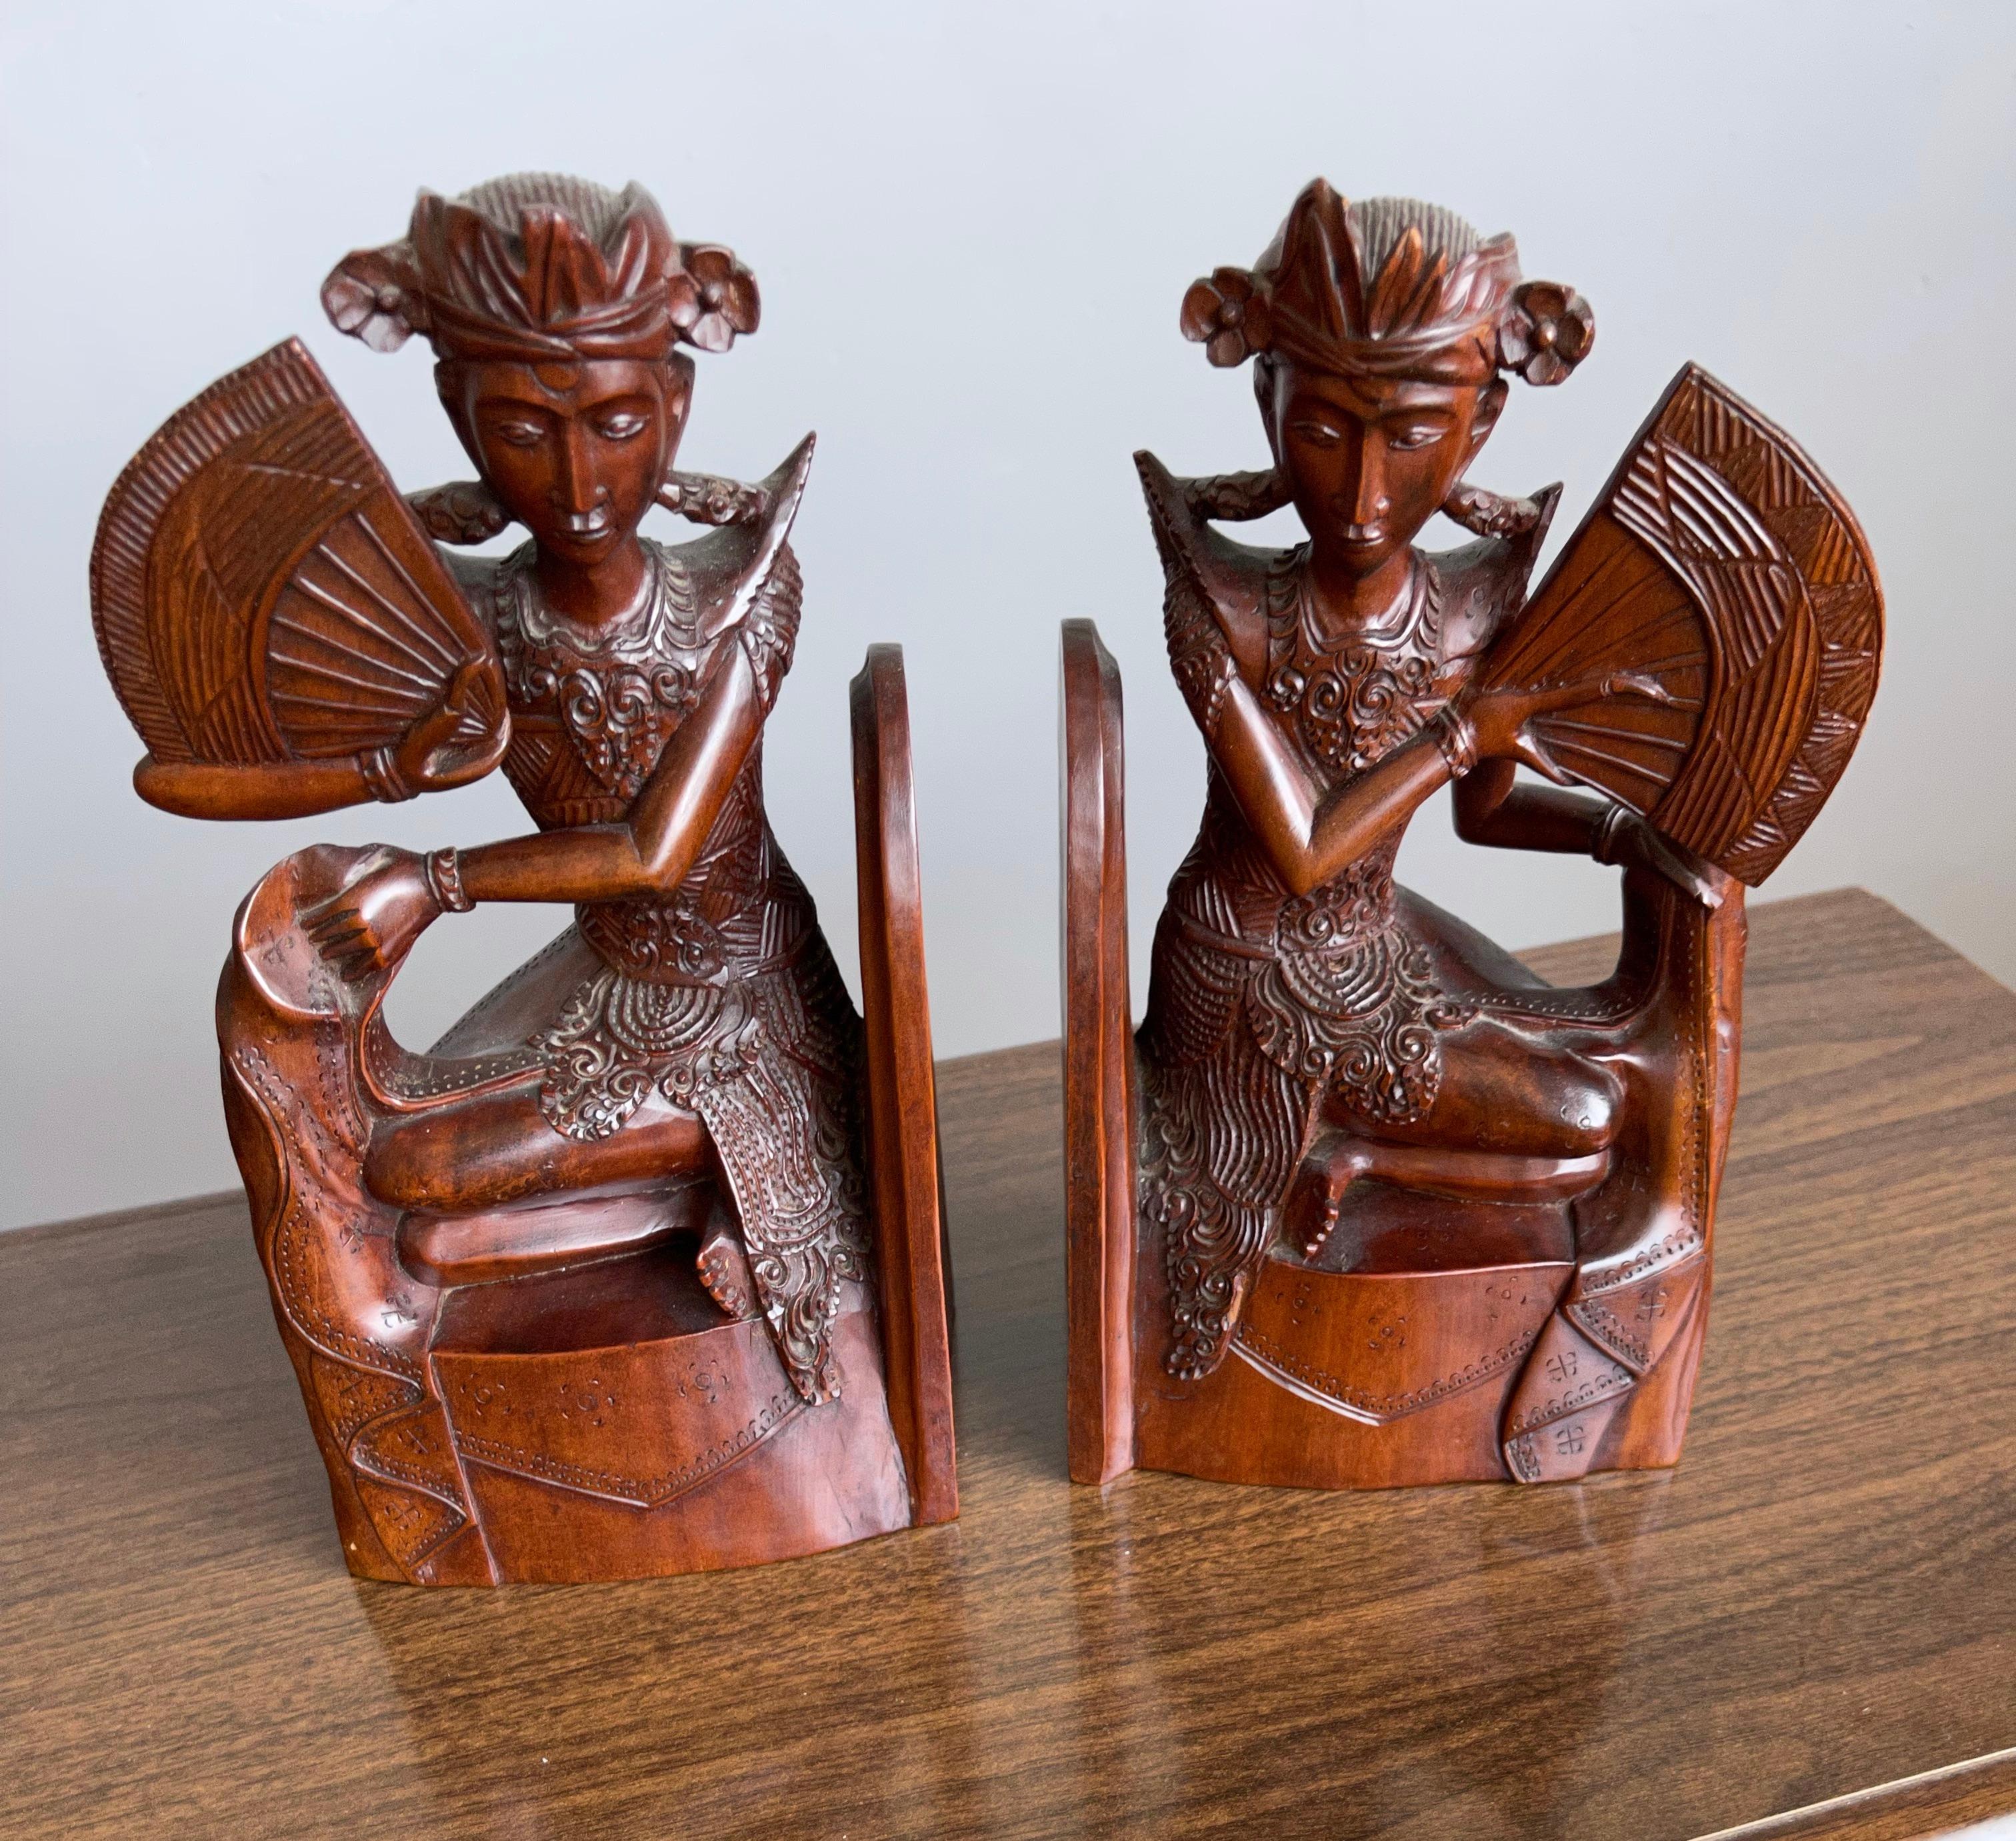 Rare, very well carved and near mint condition, bookends.

If you are looking for a pair of decorative, practical and very well crafted bookends then this rare pair could be gracing your home or office soon. Thanks to their remarkable design and